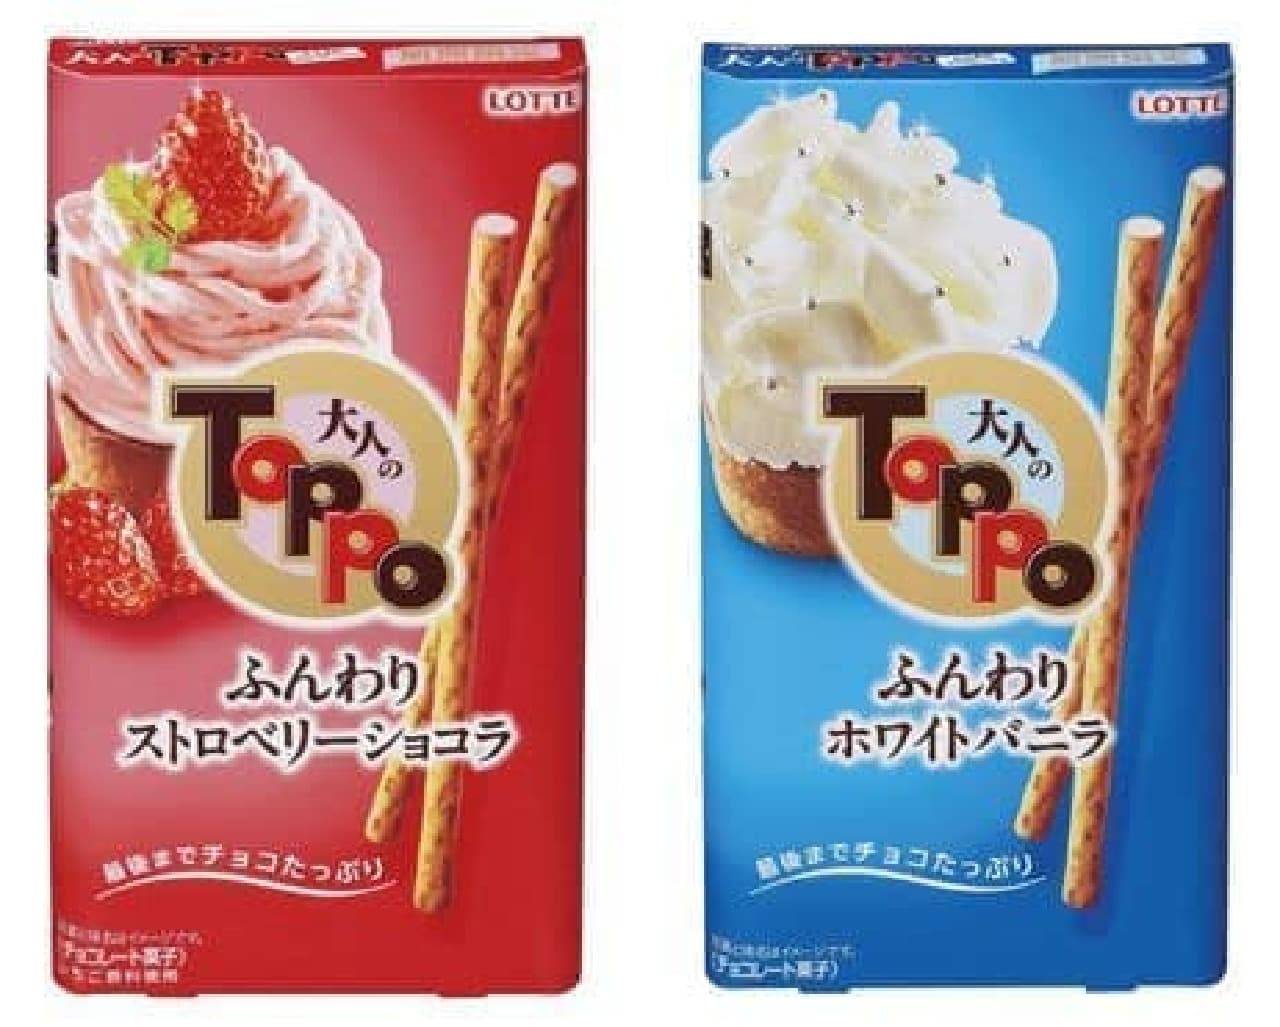 Two new flavors of "Adult Toppo"